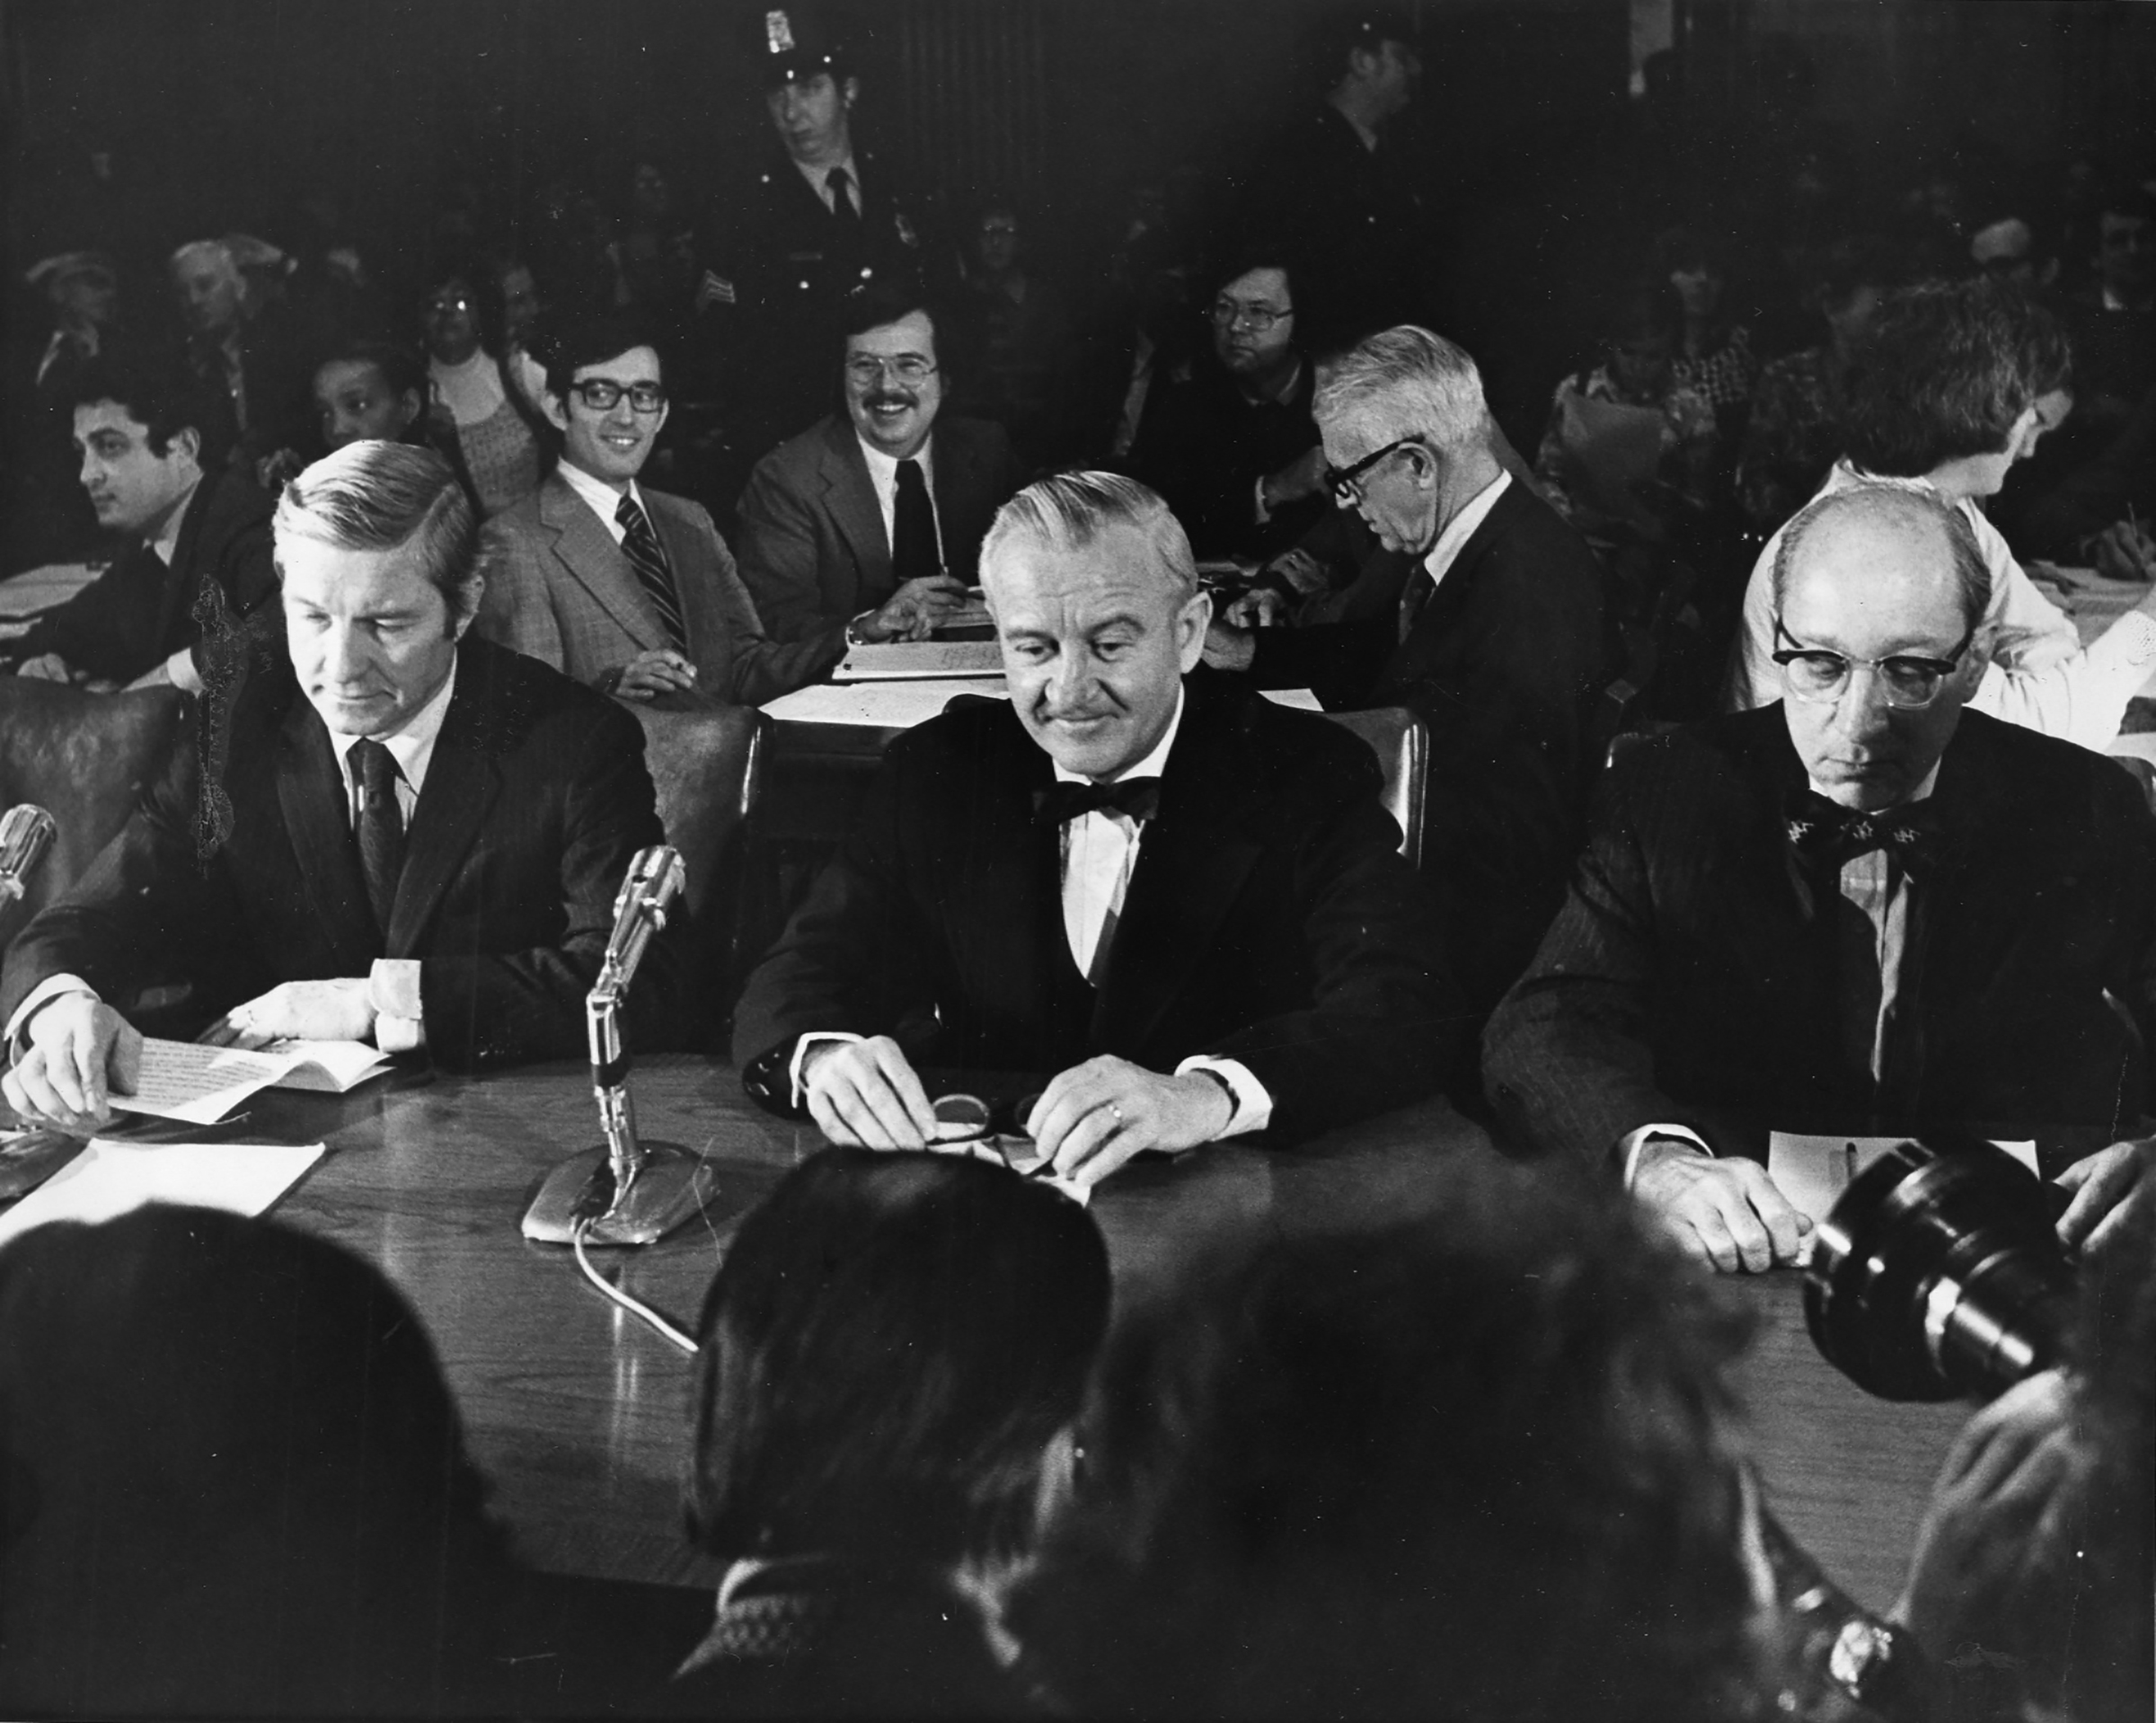 Supreme Court nominee John Paul Stevens is flanked by Sen. Charles Percy, left, and Attorney General Edward Levi at a confirmation hearing before the Senate Judiciary Committee in Washington, D.C., on Dec. 8, 1975.